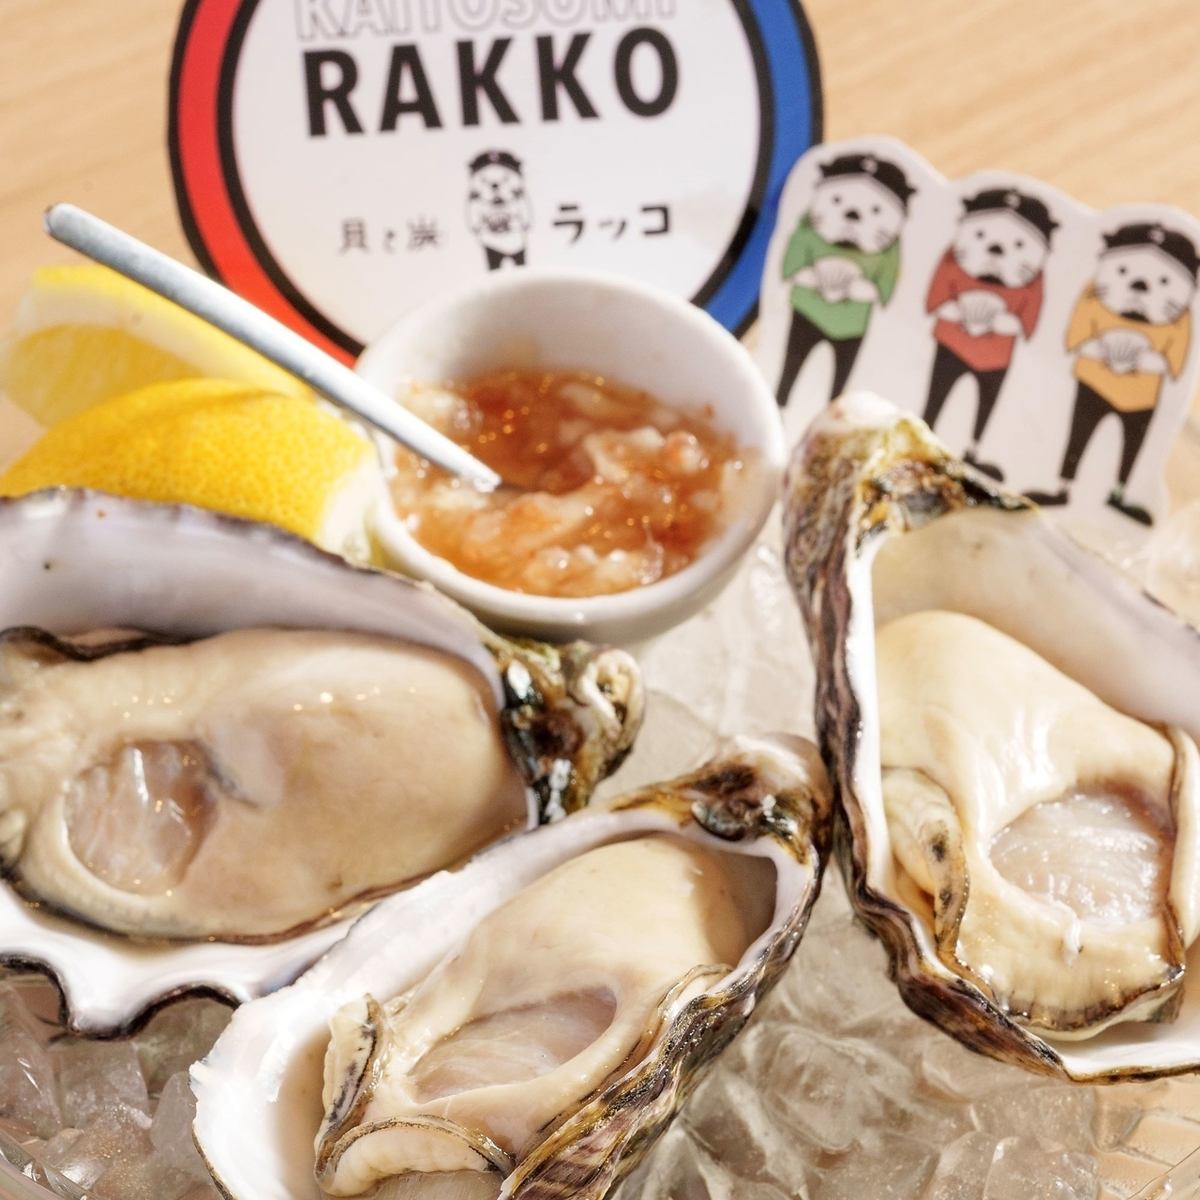 Charcoal-grilled fresh oysters, which we are proud of! Please enjoy seafood casually in a stylish restaurant.